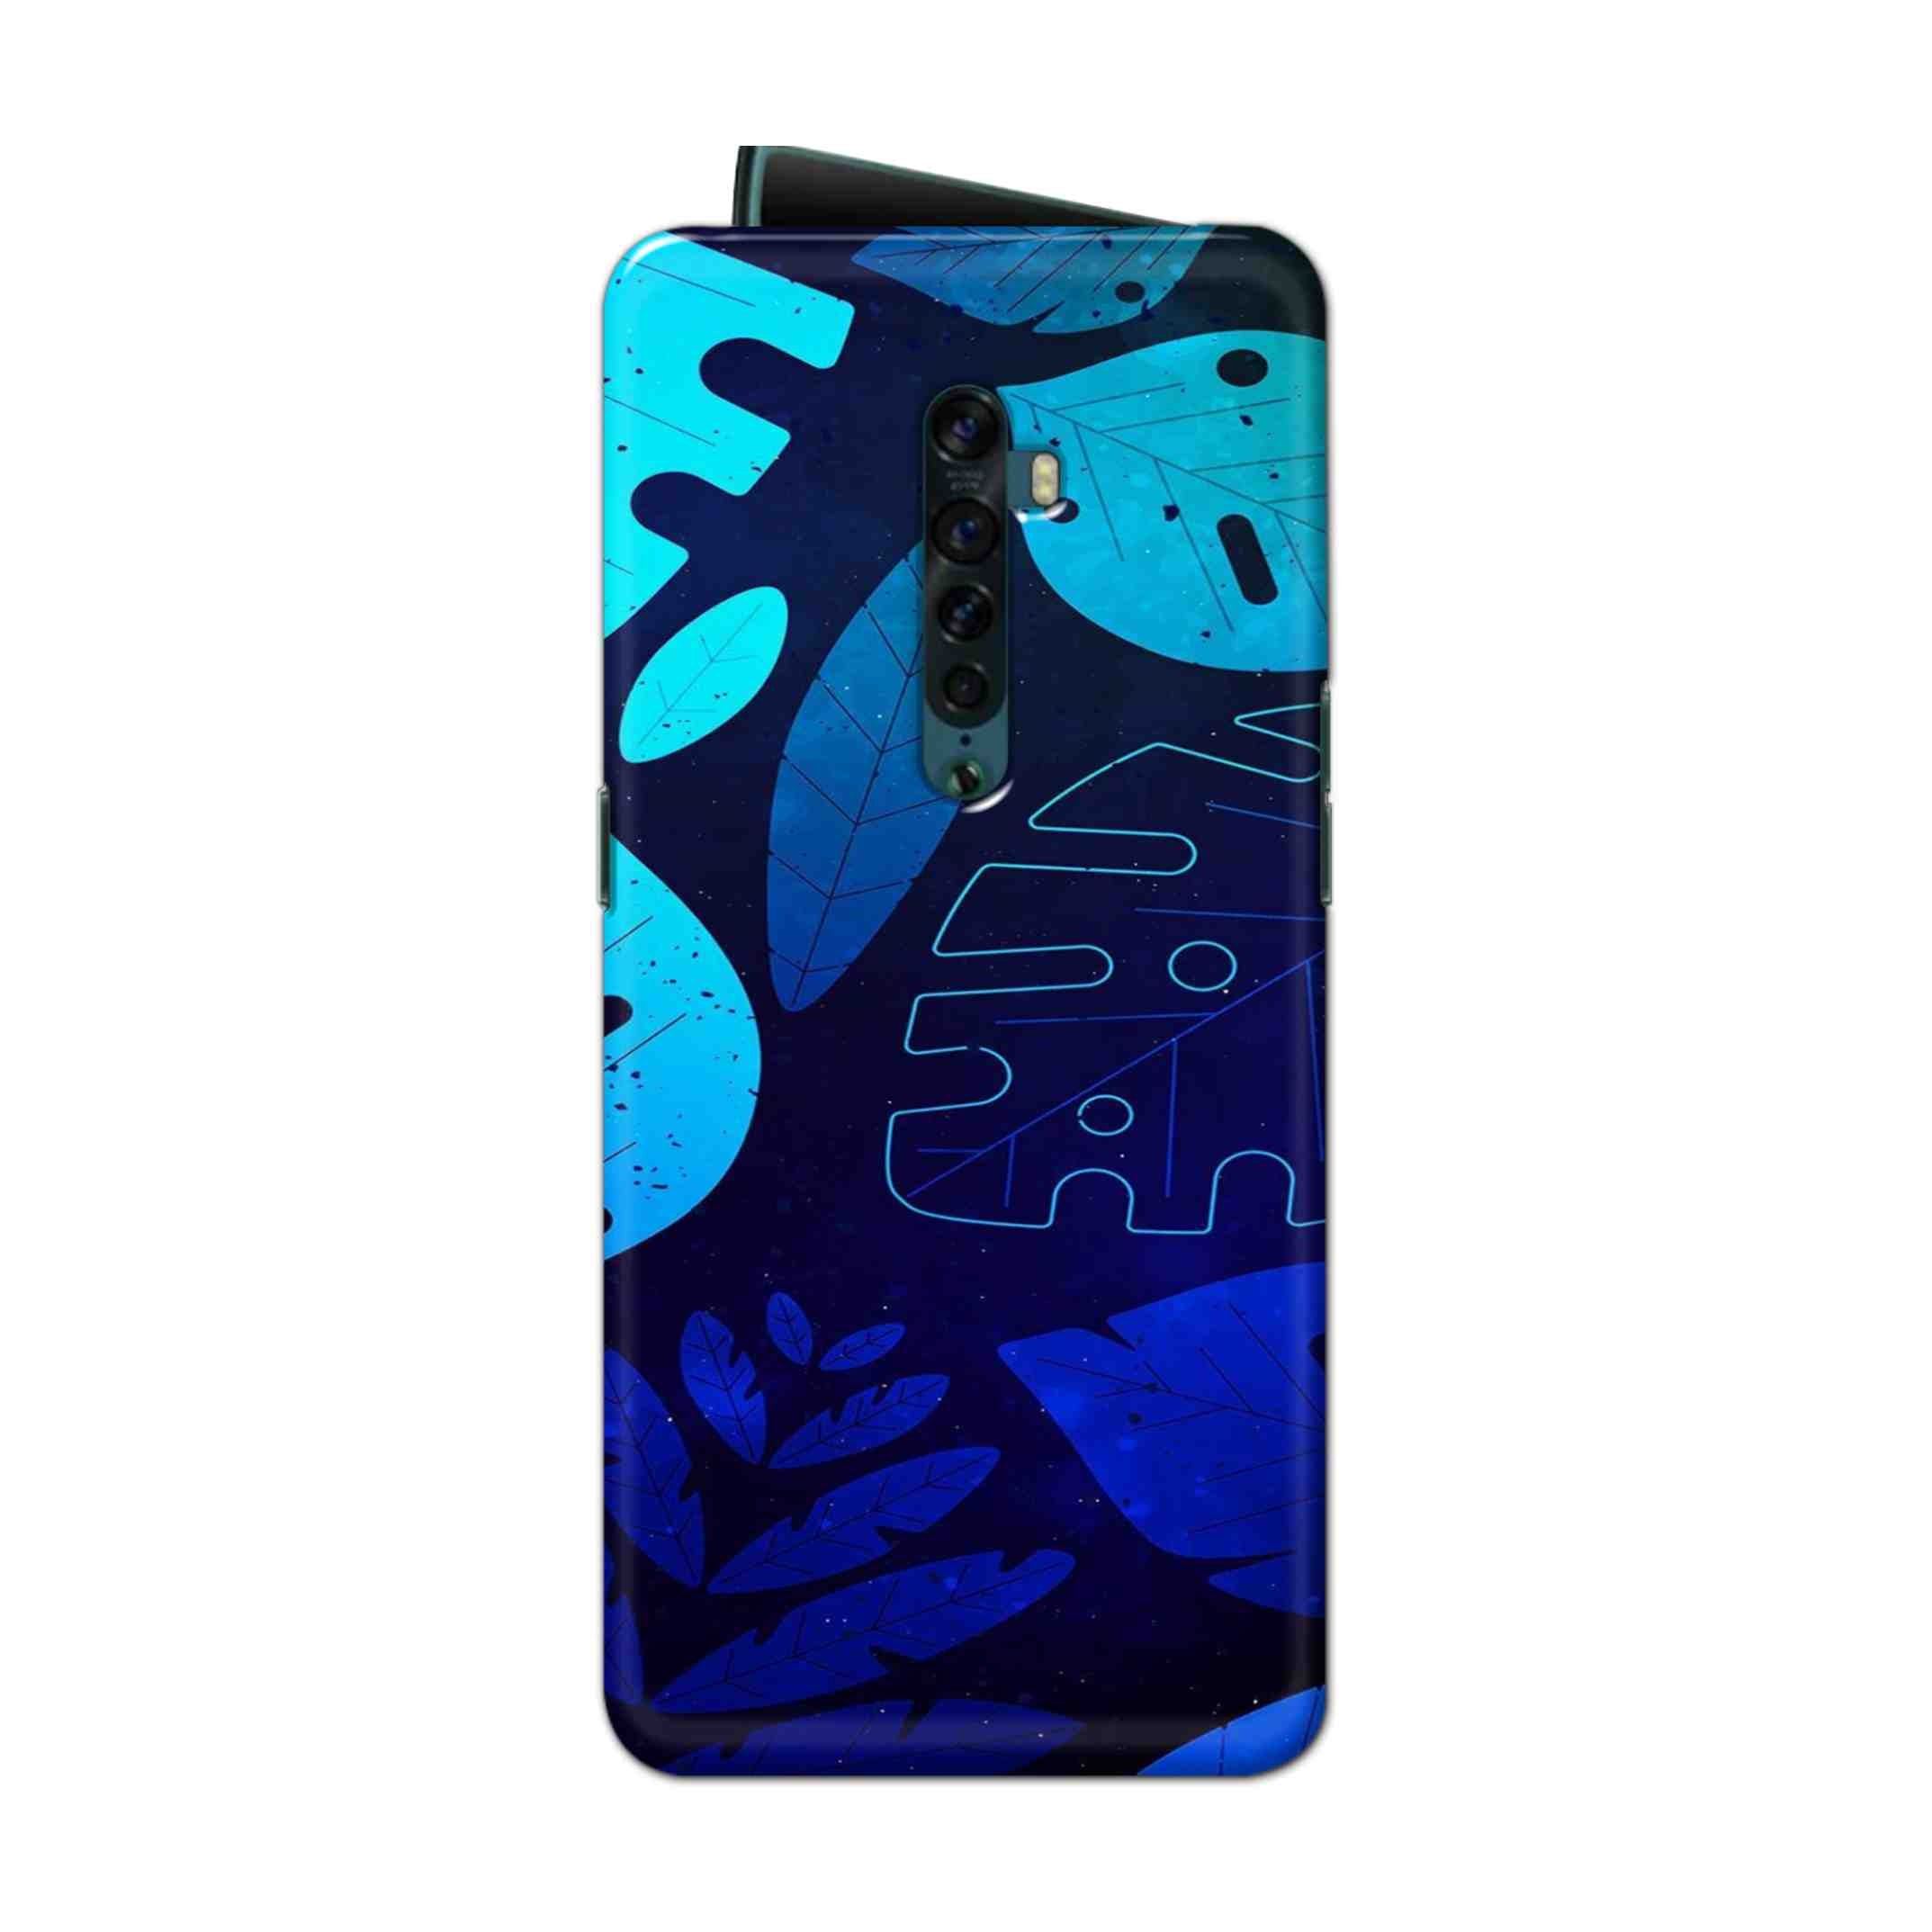 Buy Neon Leaf Hard Back Mobile Phone Case Cover For Oppo Reno 2 Online